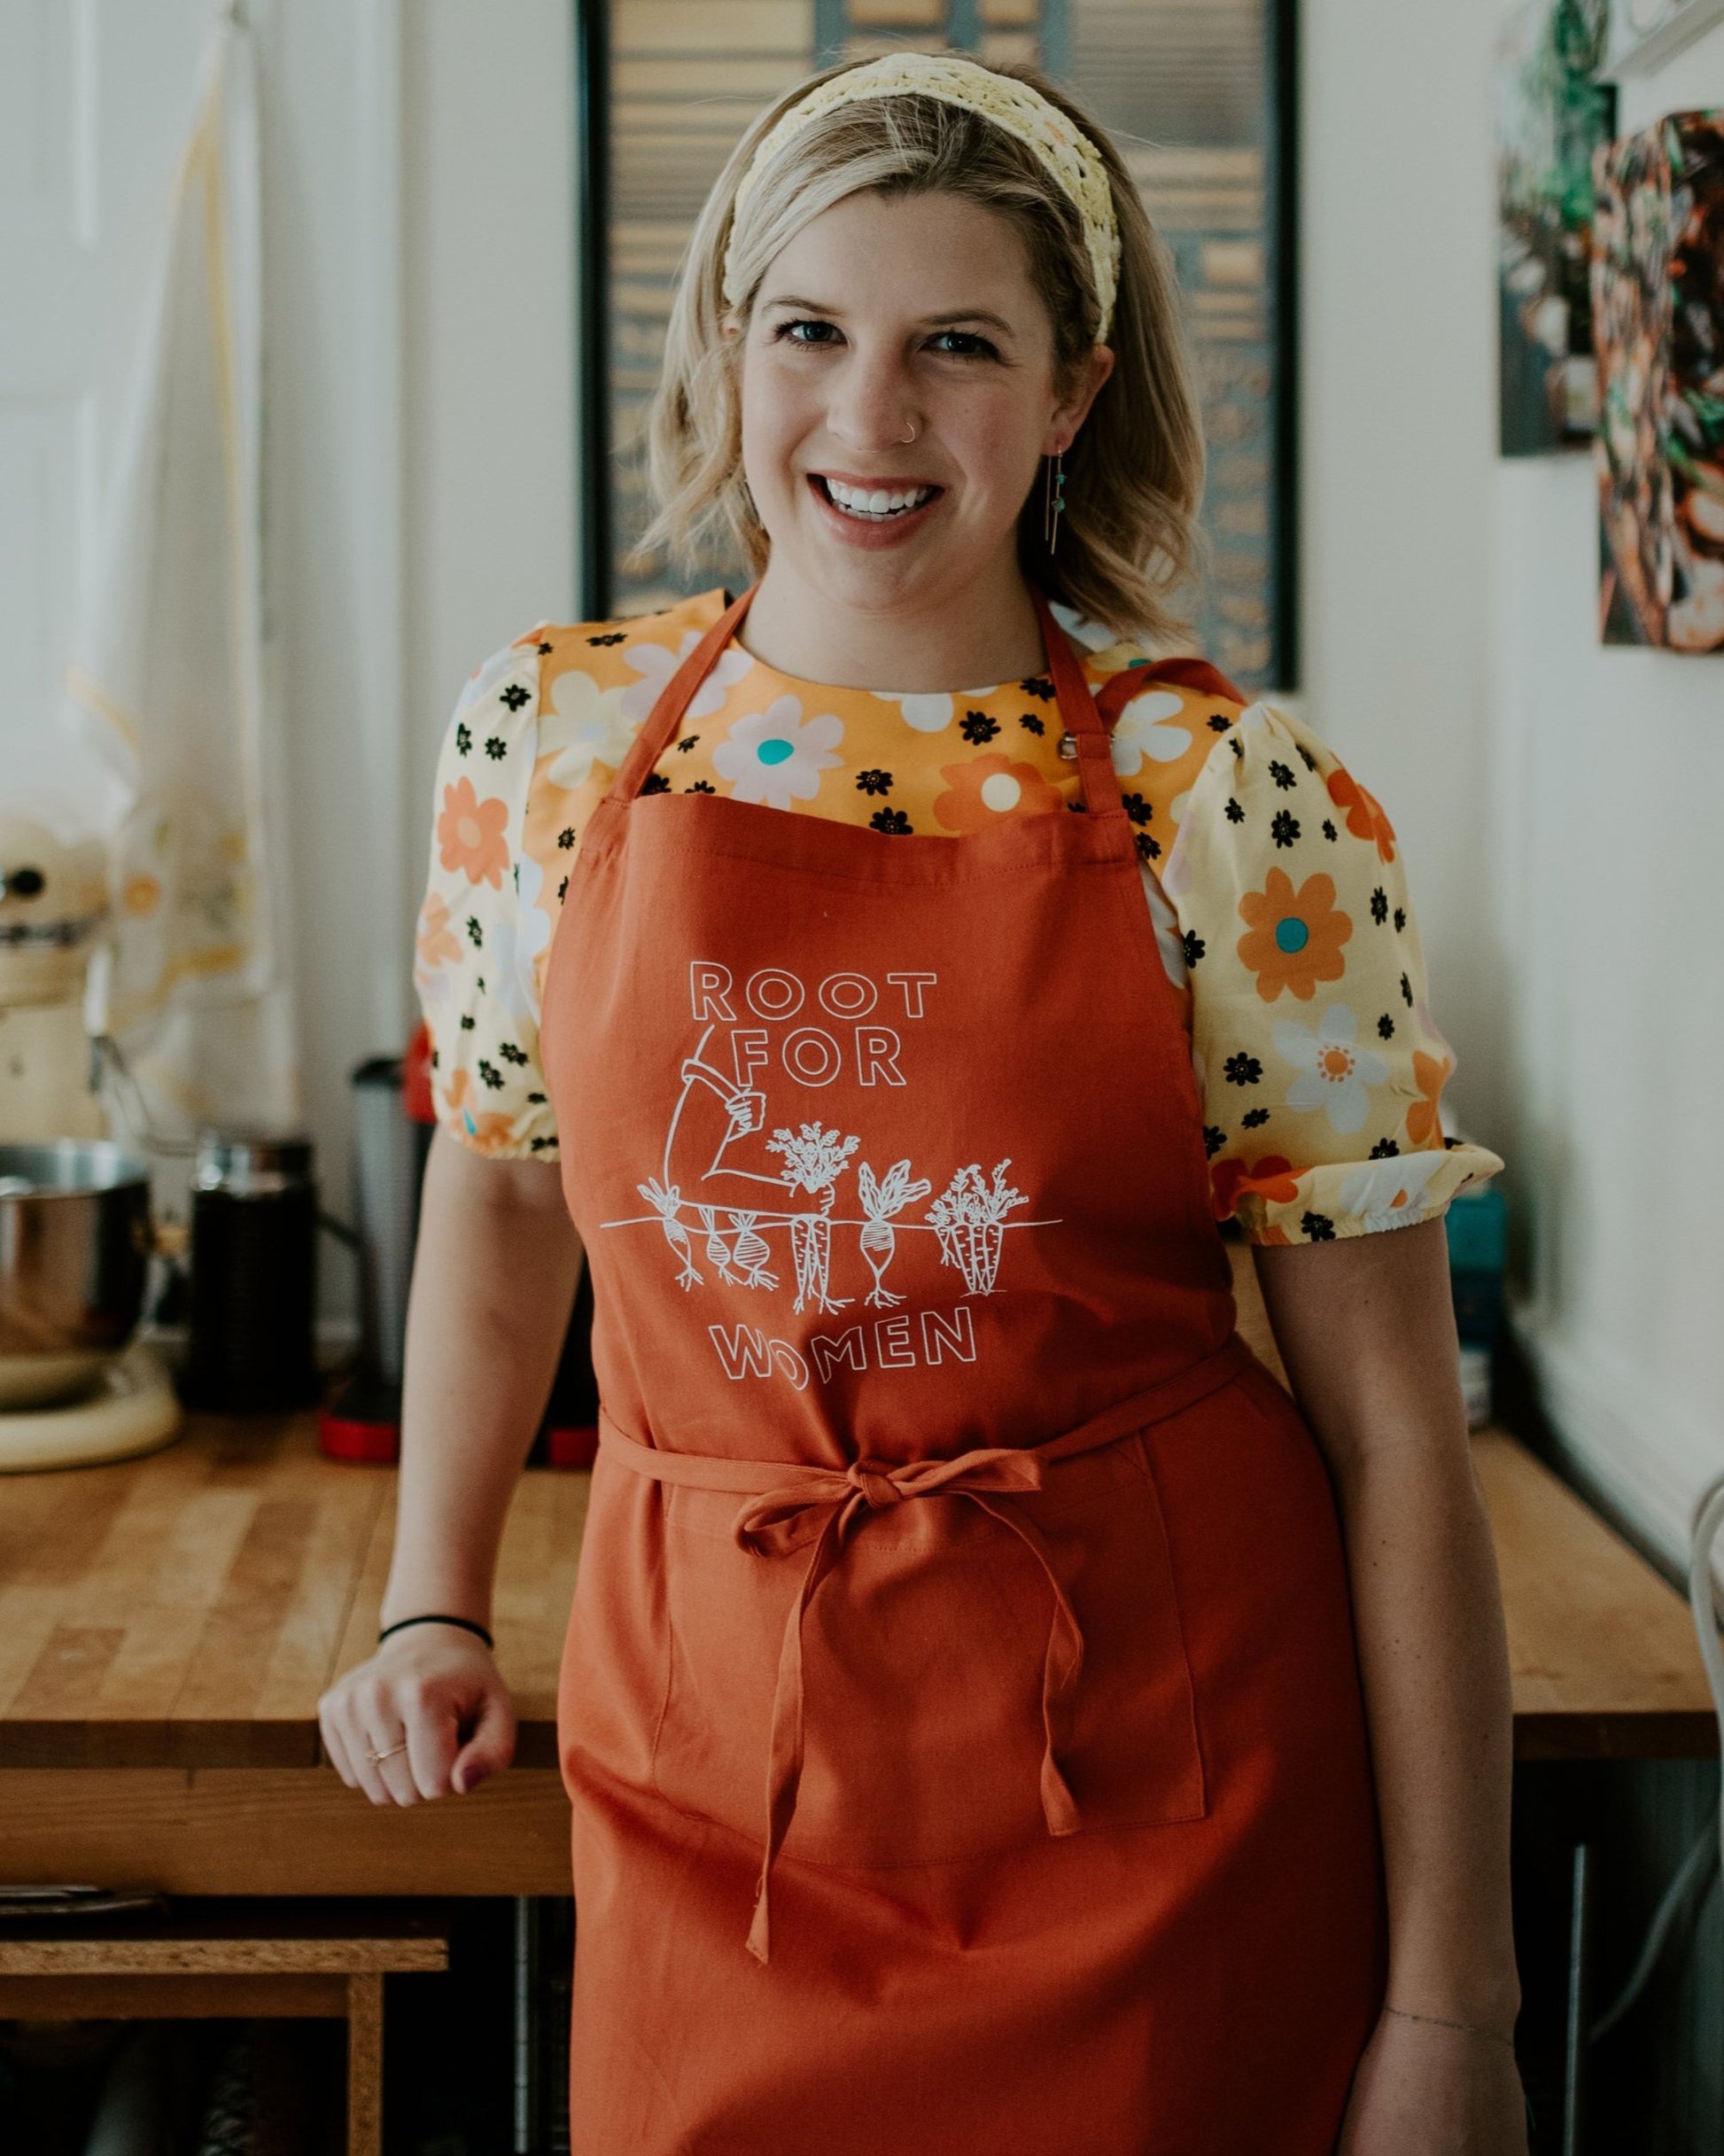 A woman wears an orange "Root for Women" apron over a flowered top